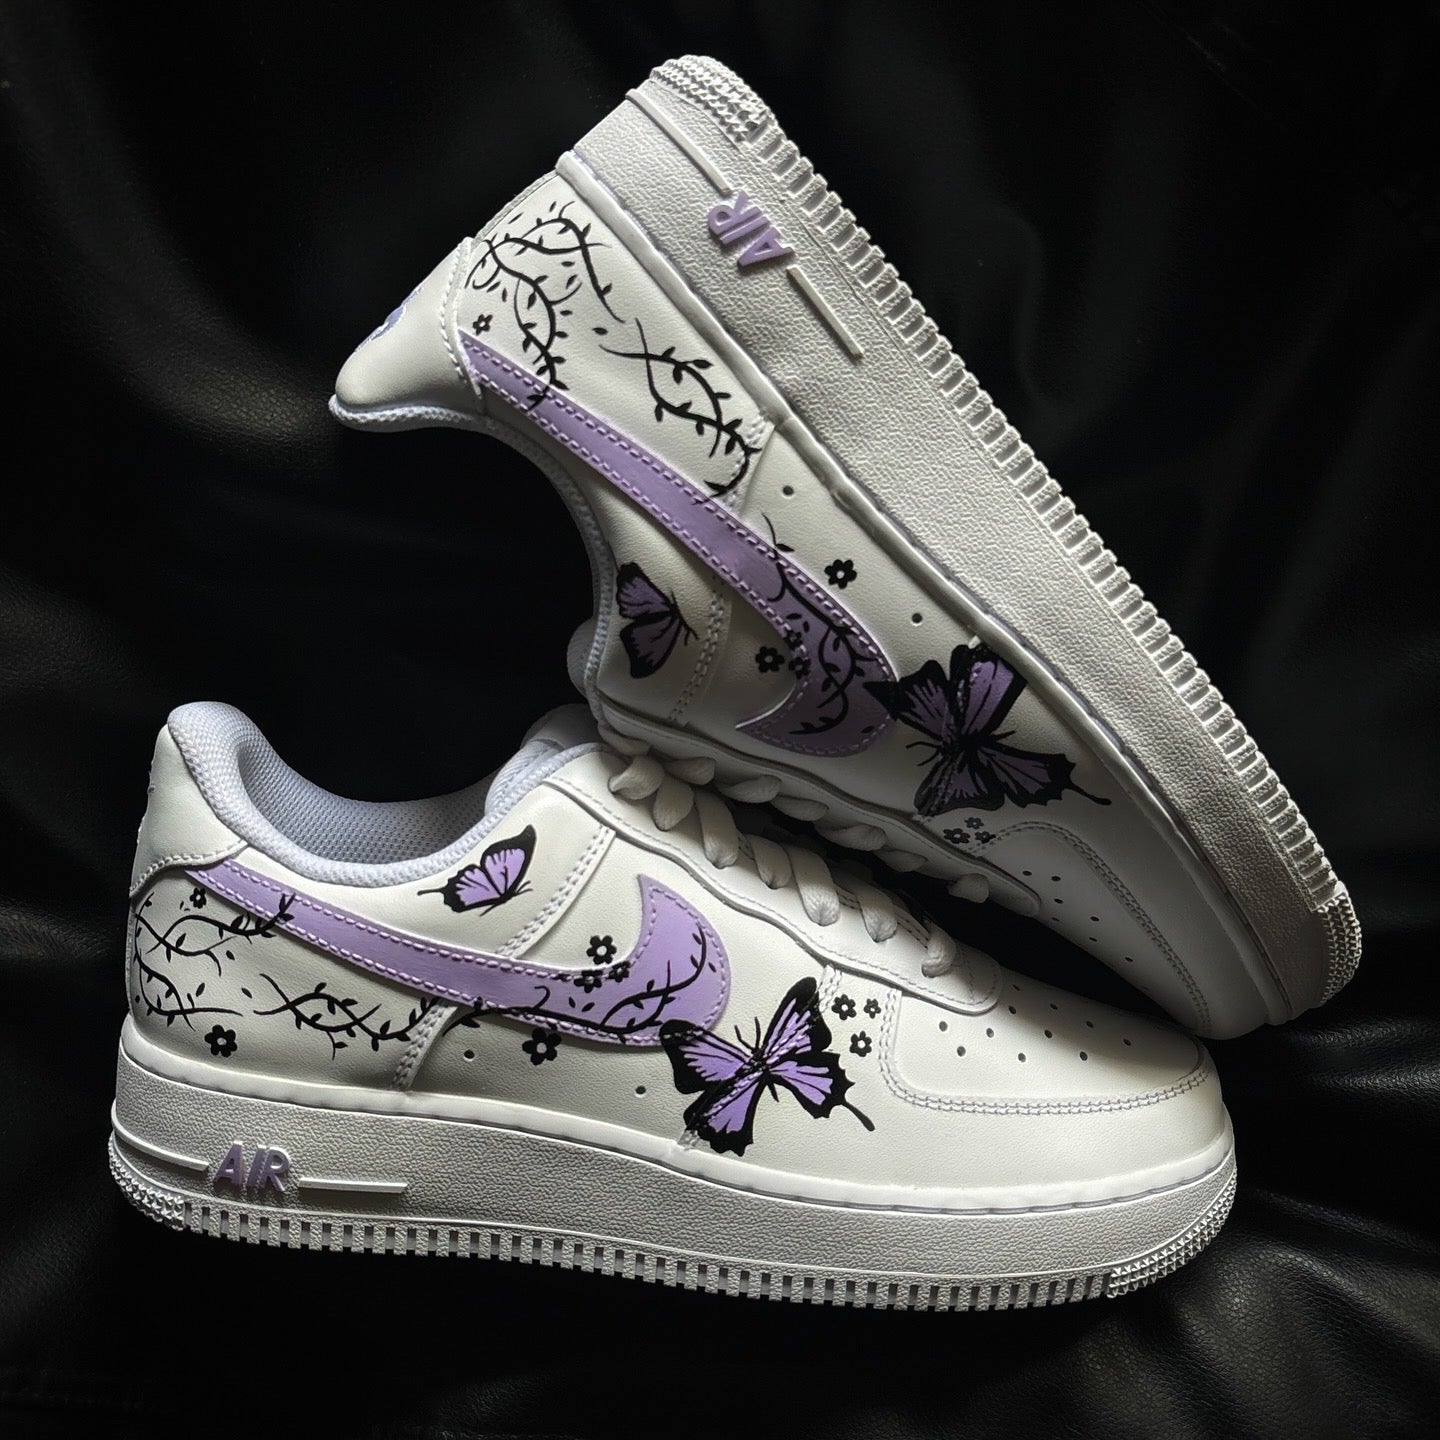 Nike Air Force 1 x lavender dreamland butterfly